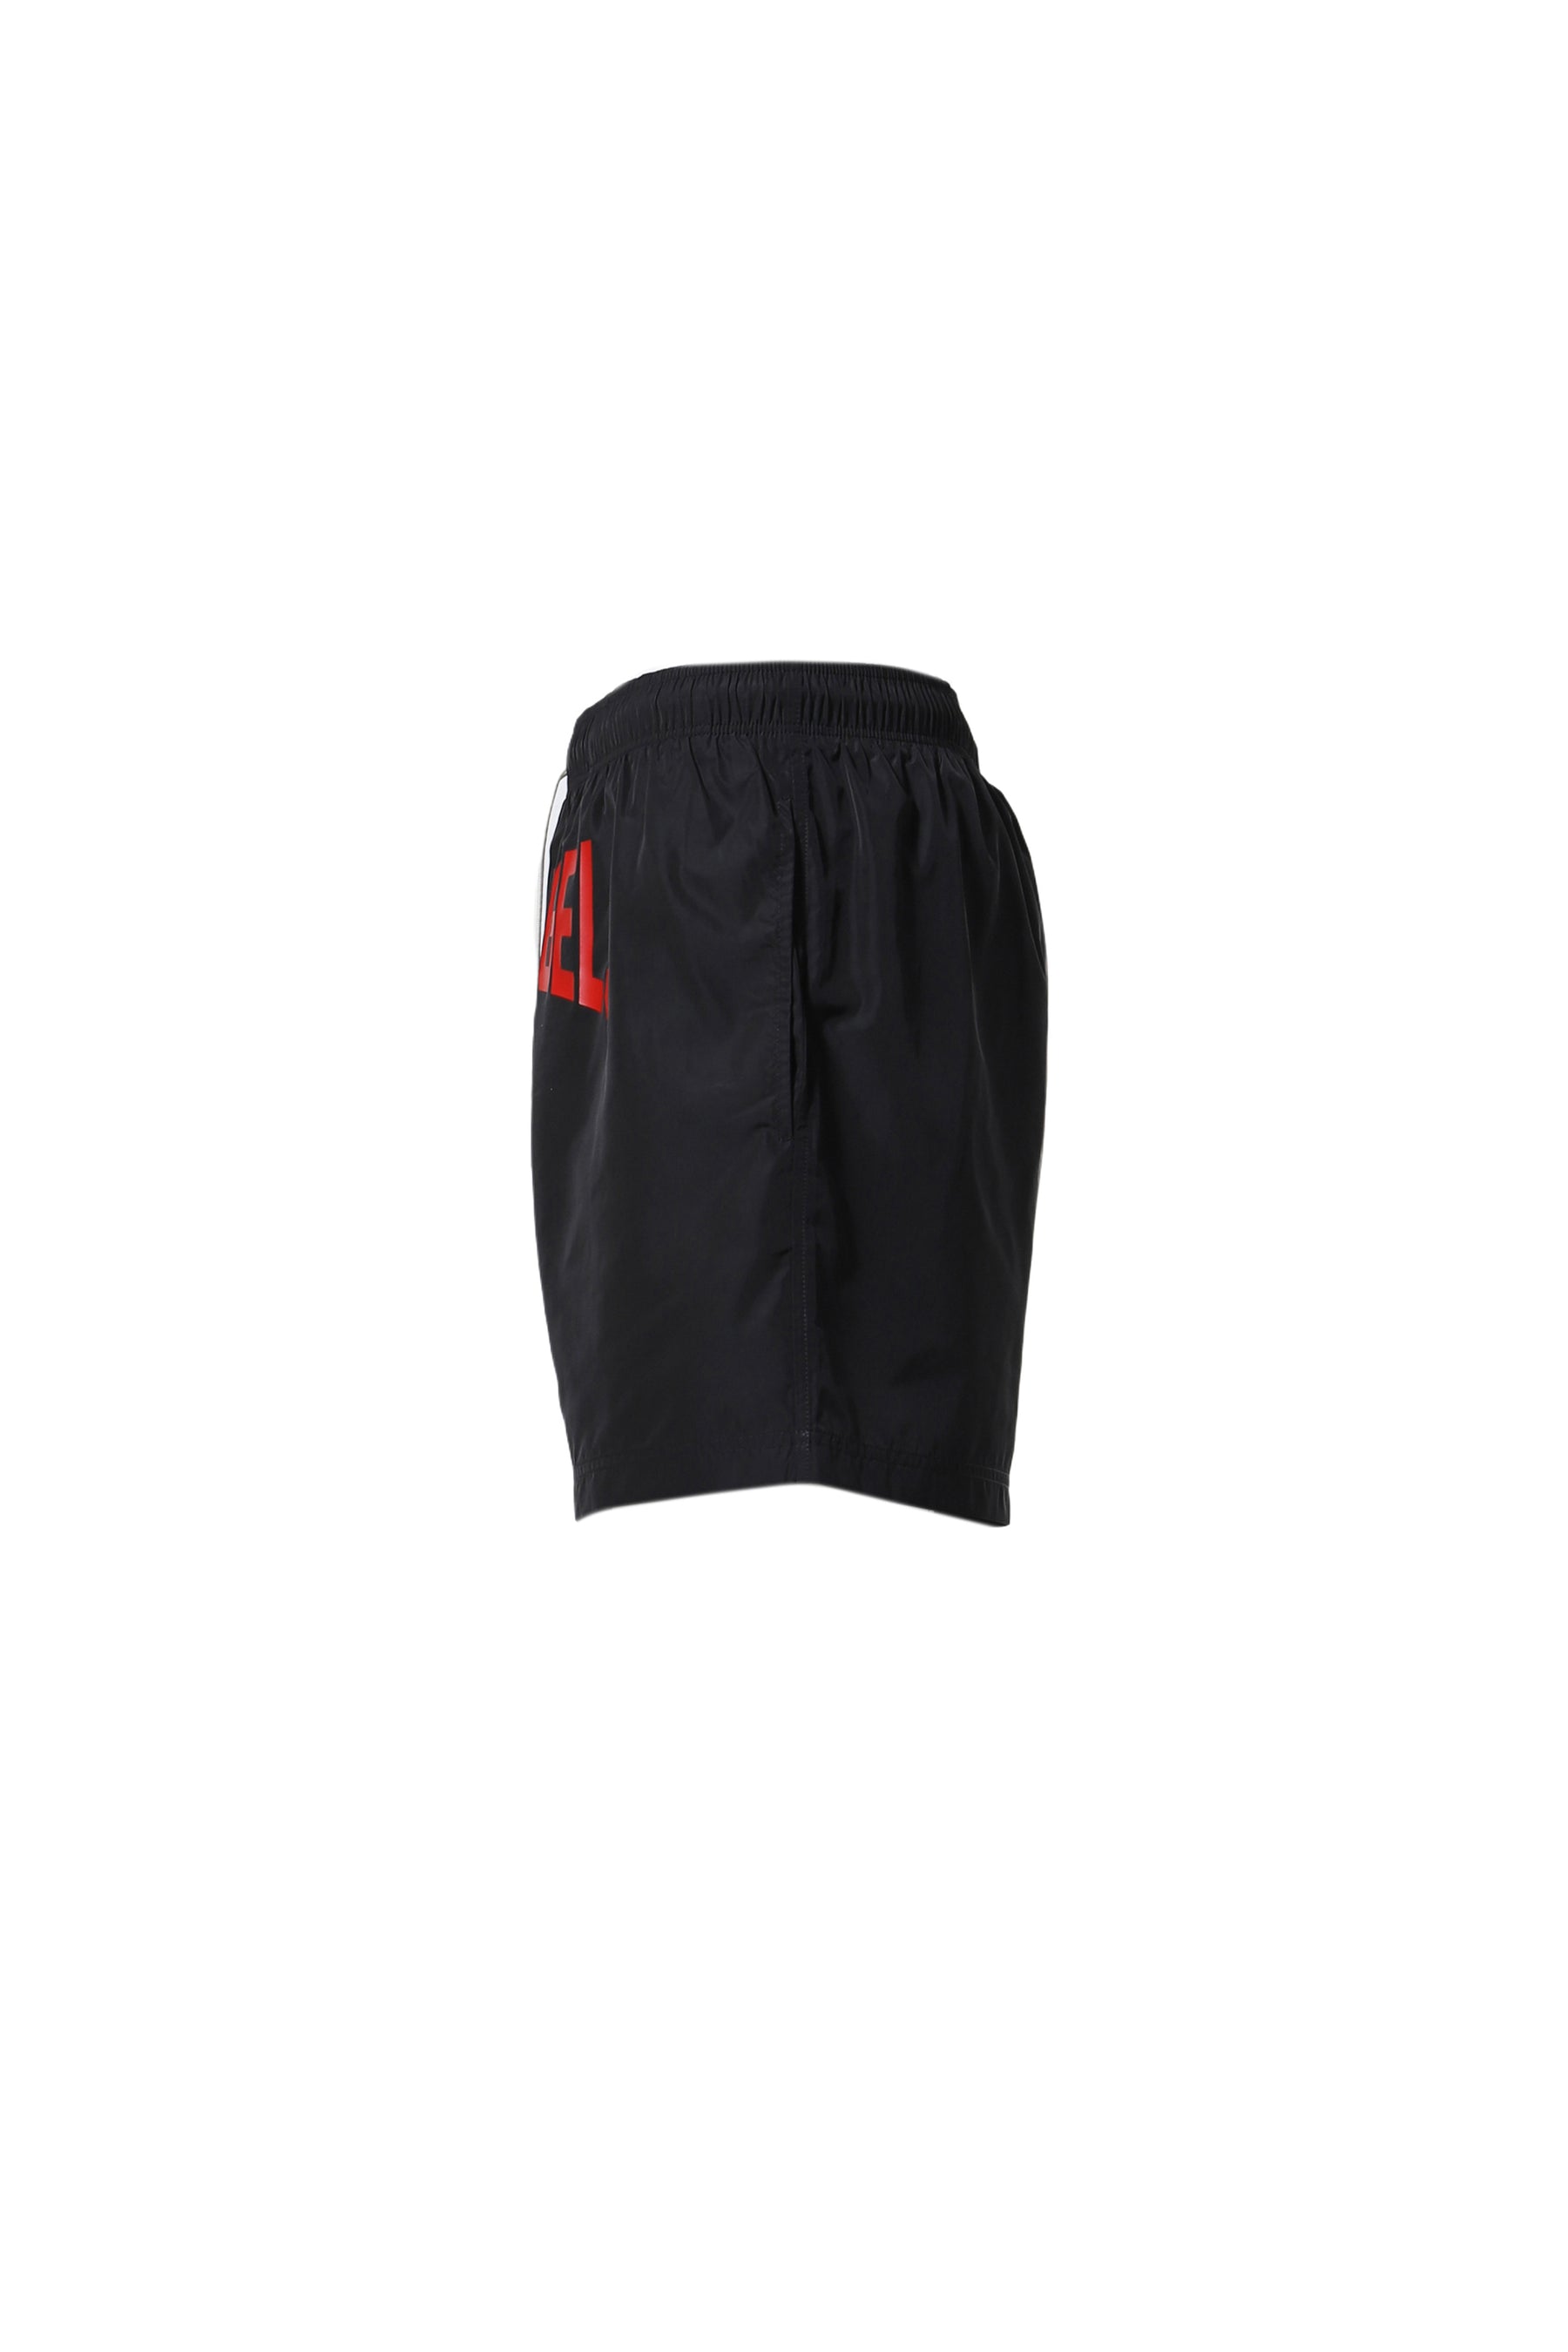 PA CITY SWIMSHORTS / BLK RED